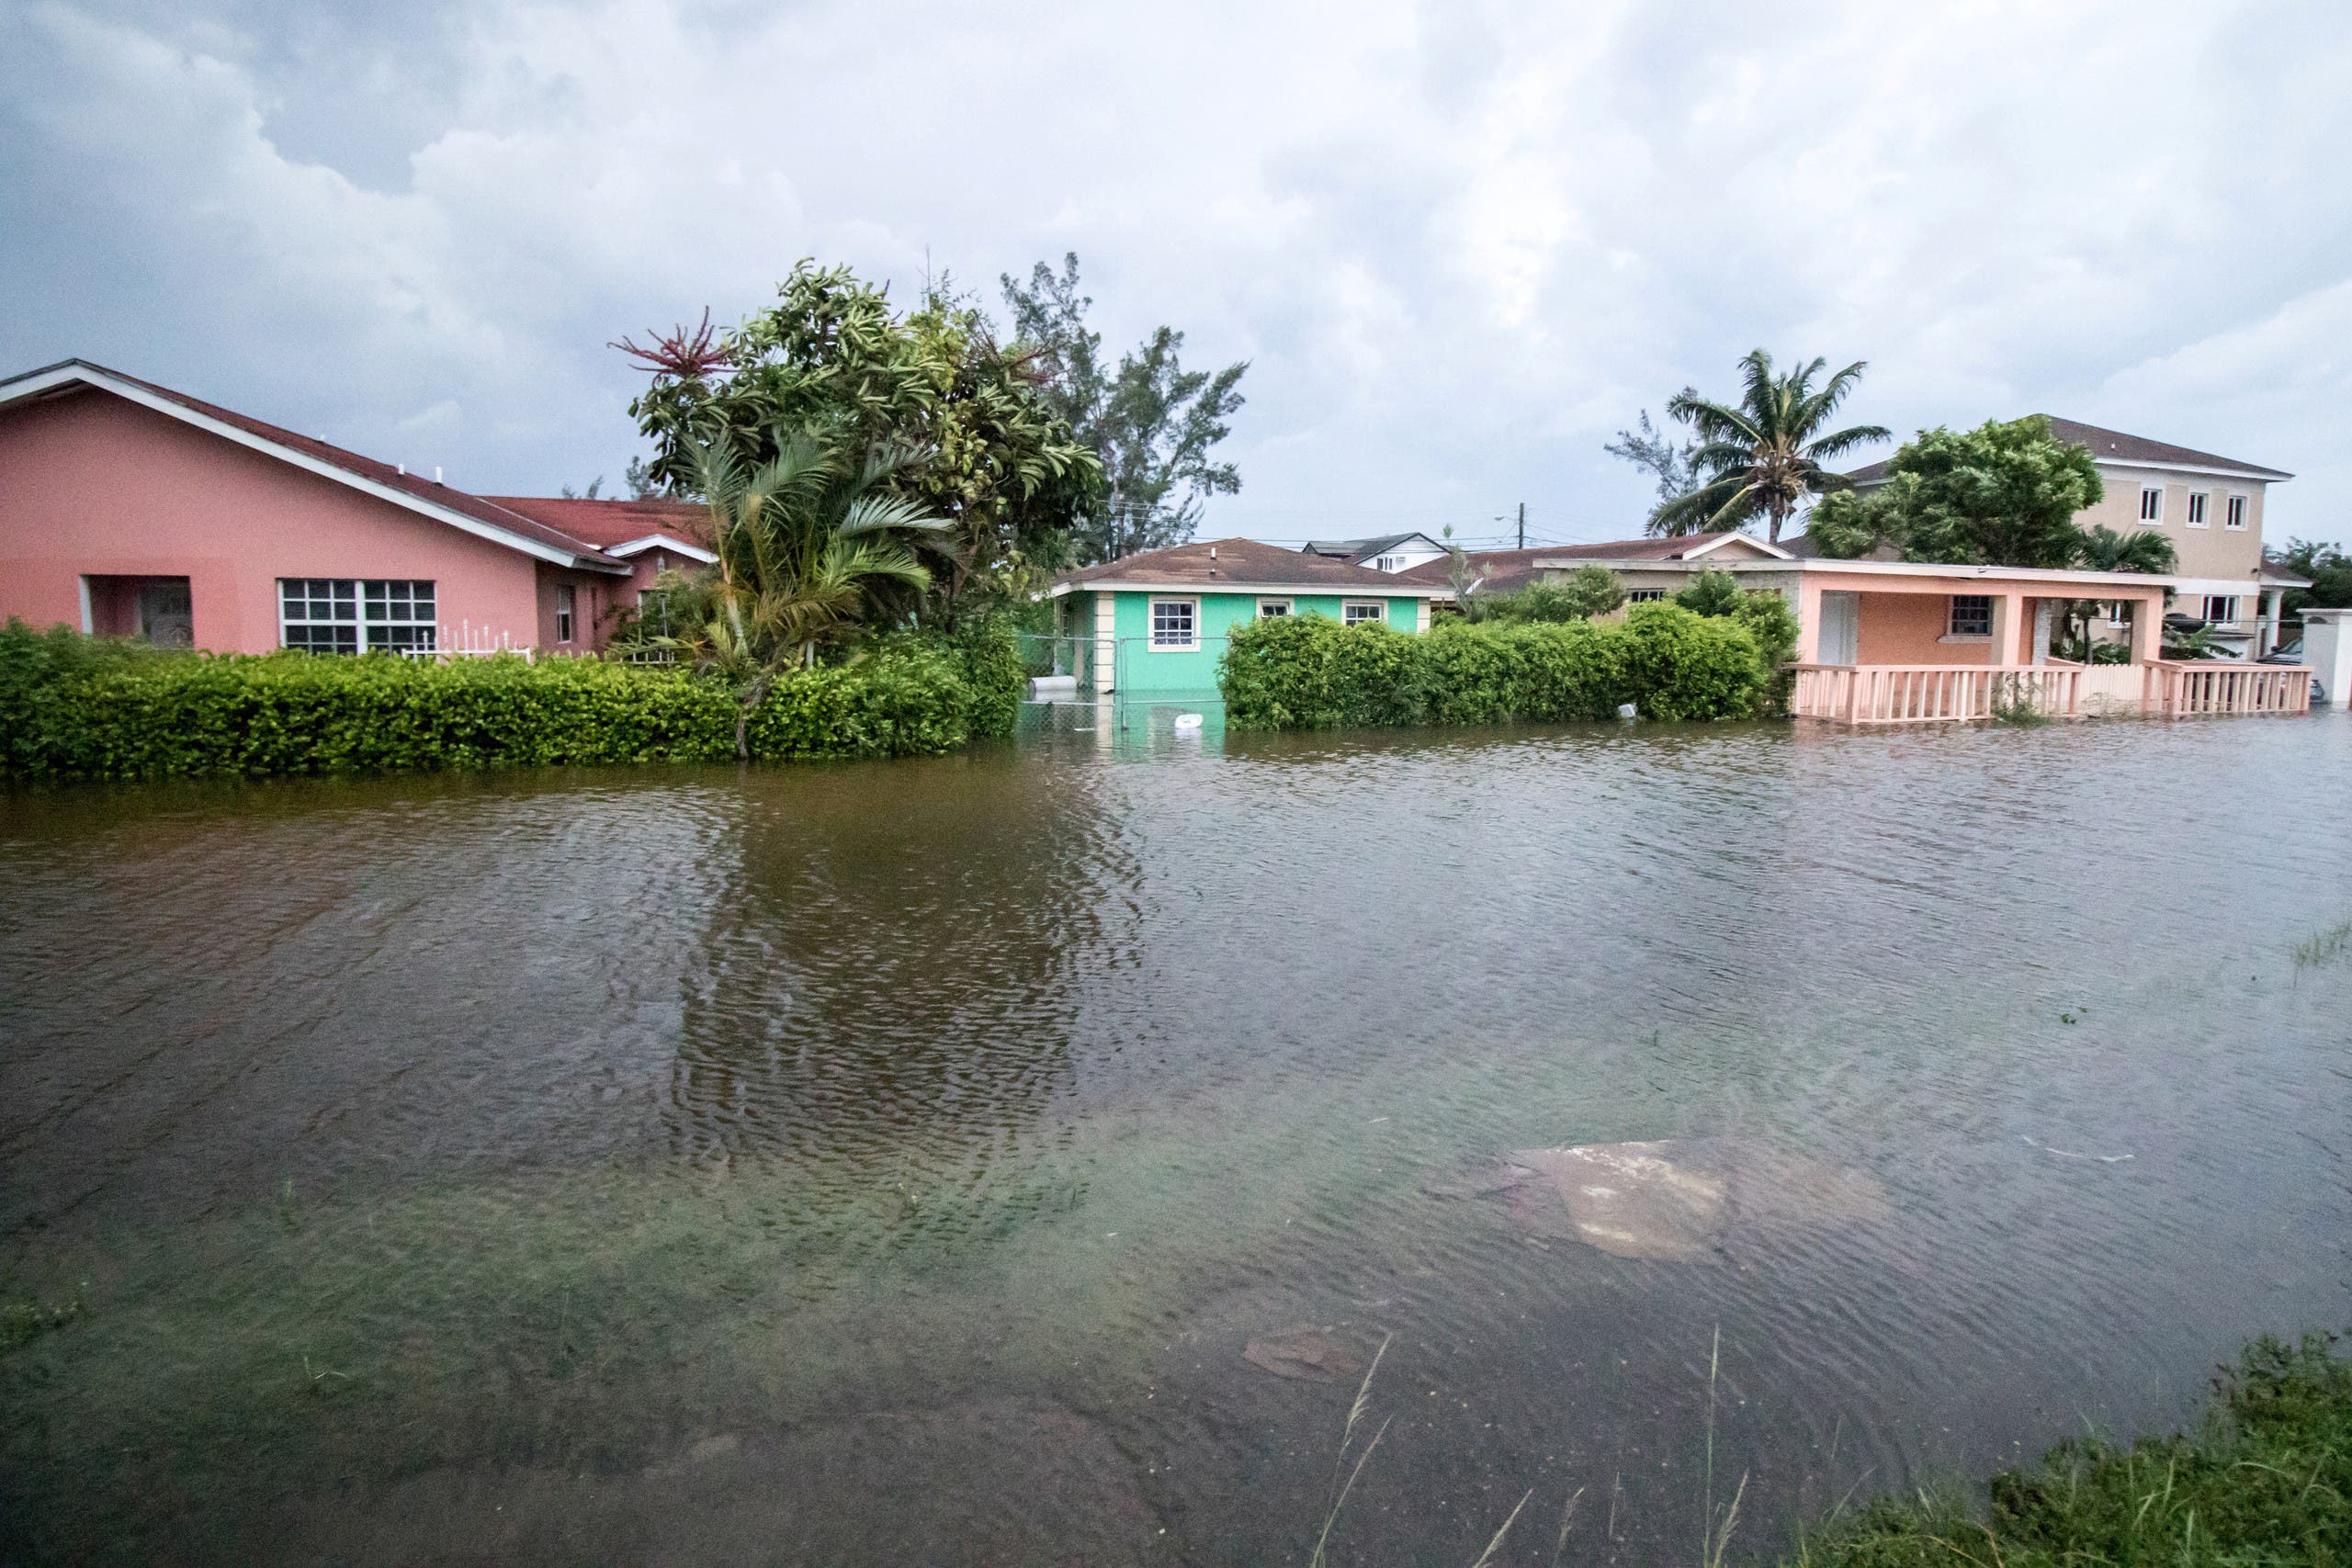 Houses line a flooded street after the effects of Hurricane Dorian arrived in Nassau, Bahamas, September 2, 2019. REUTERS